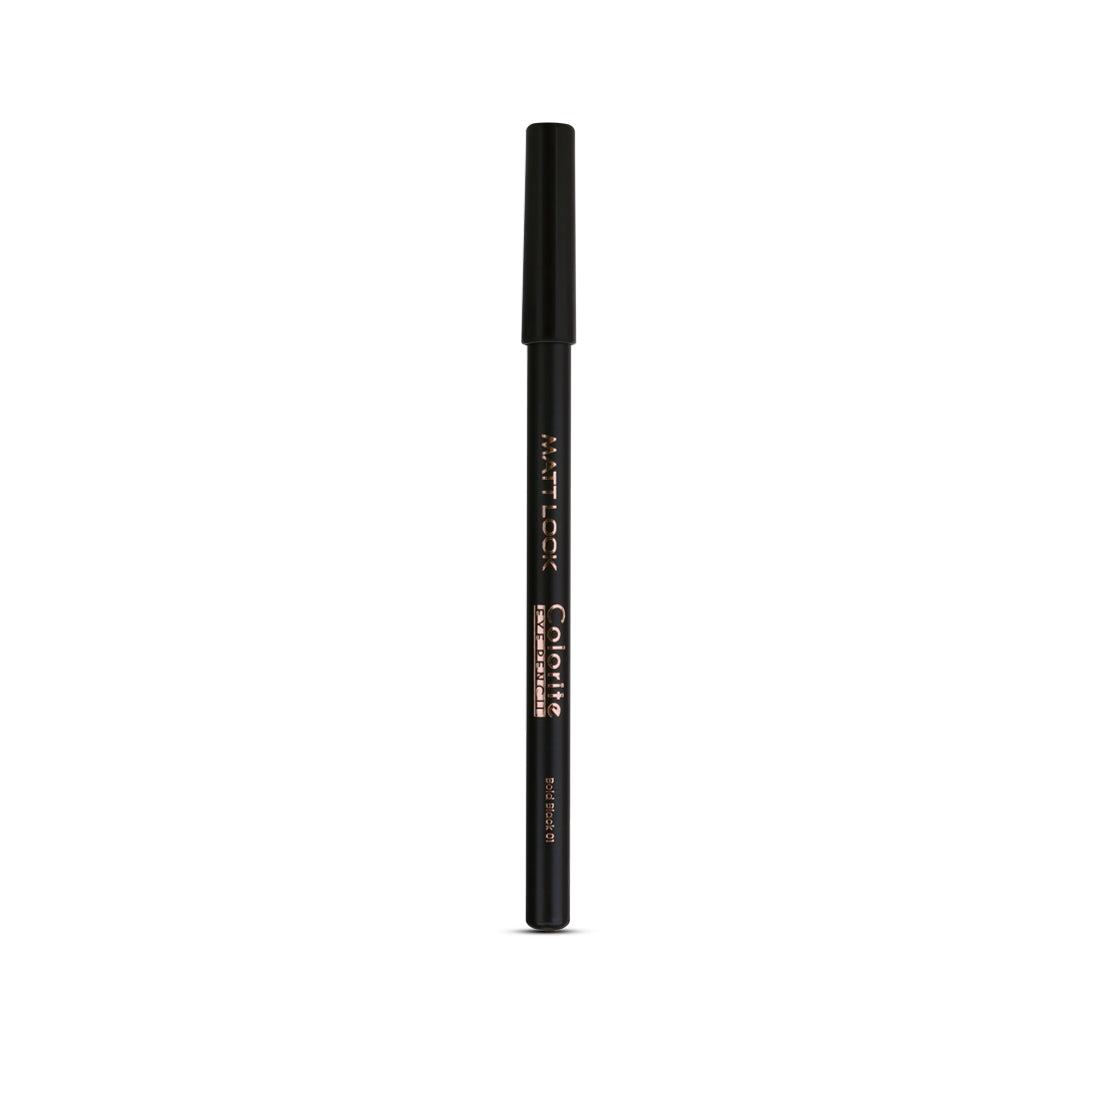 Matt Look Colorite Eye Pencil, Long Lasting, Smudge Proof, Enriched With Vitamin E, Glides Smoothly, One Stroke Application, Handy Product Easy To Carry And Travel Friendly